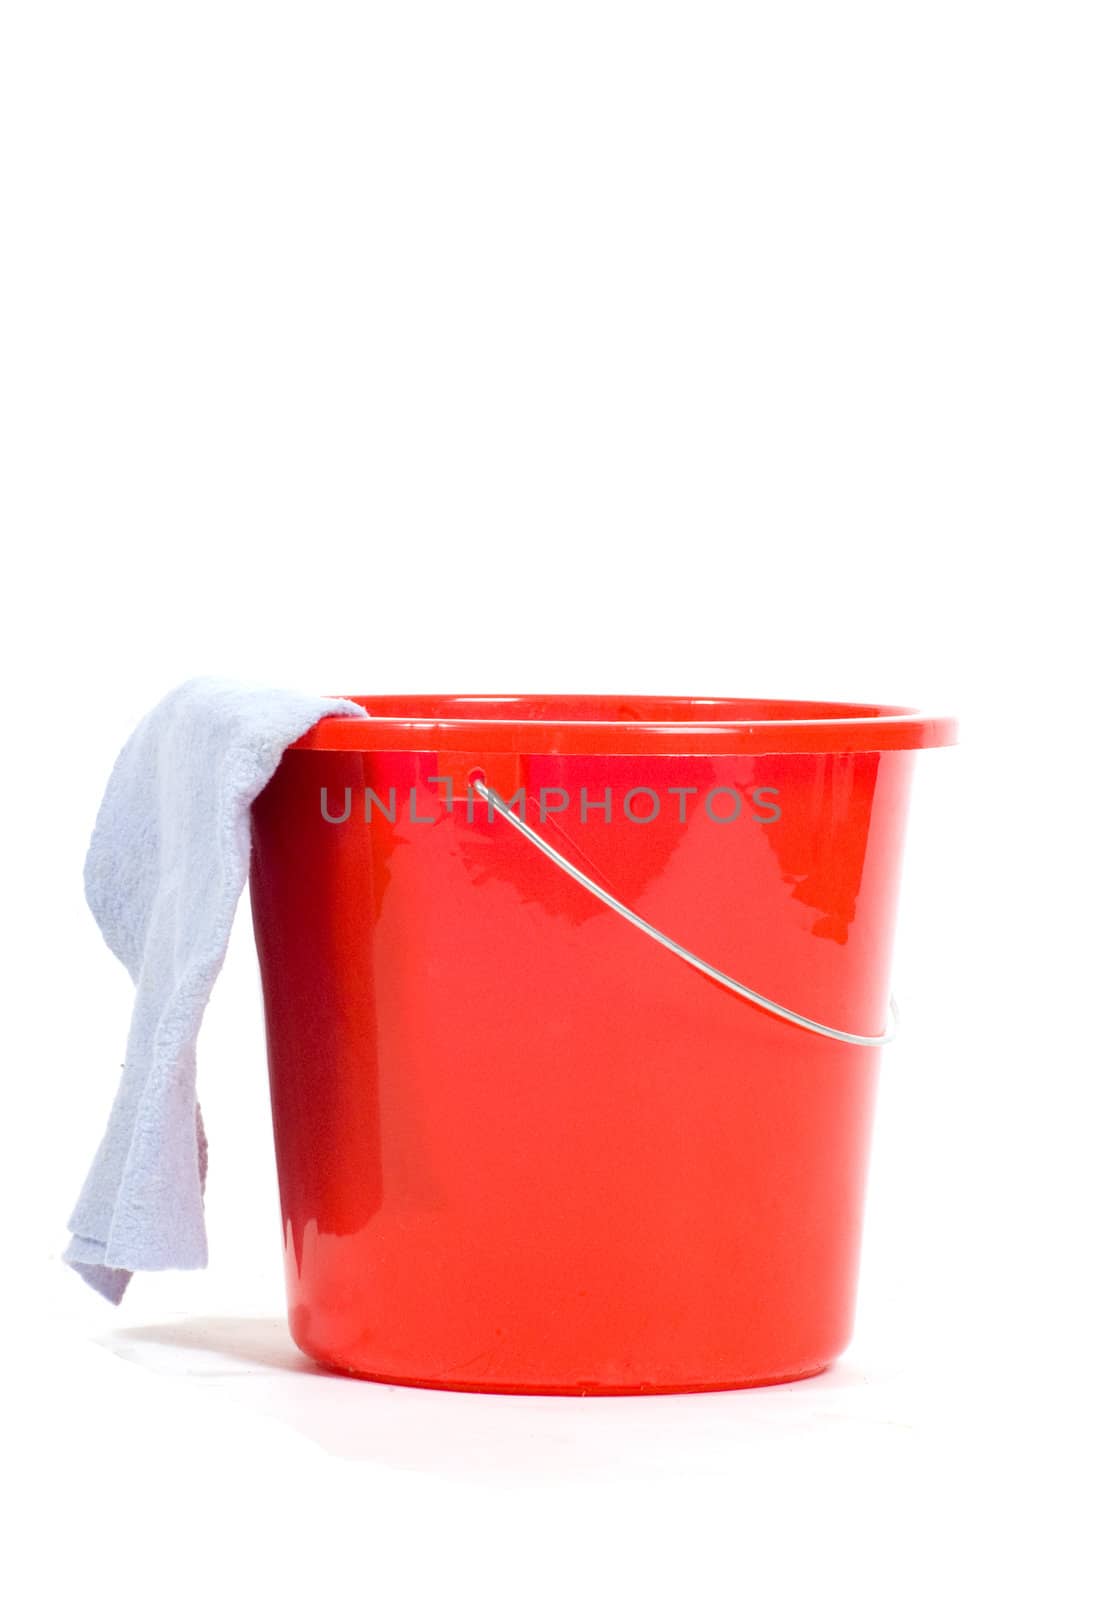 red bucket with dishcloth  isolated on white